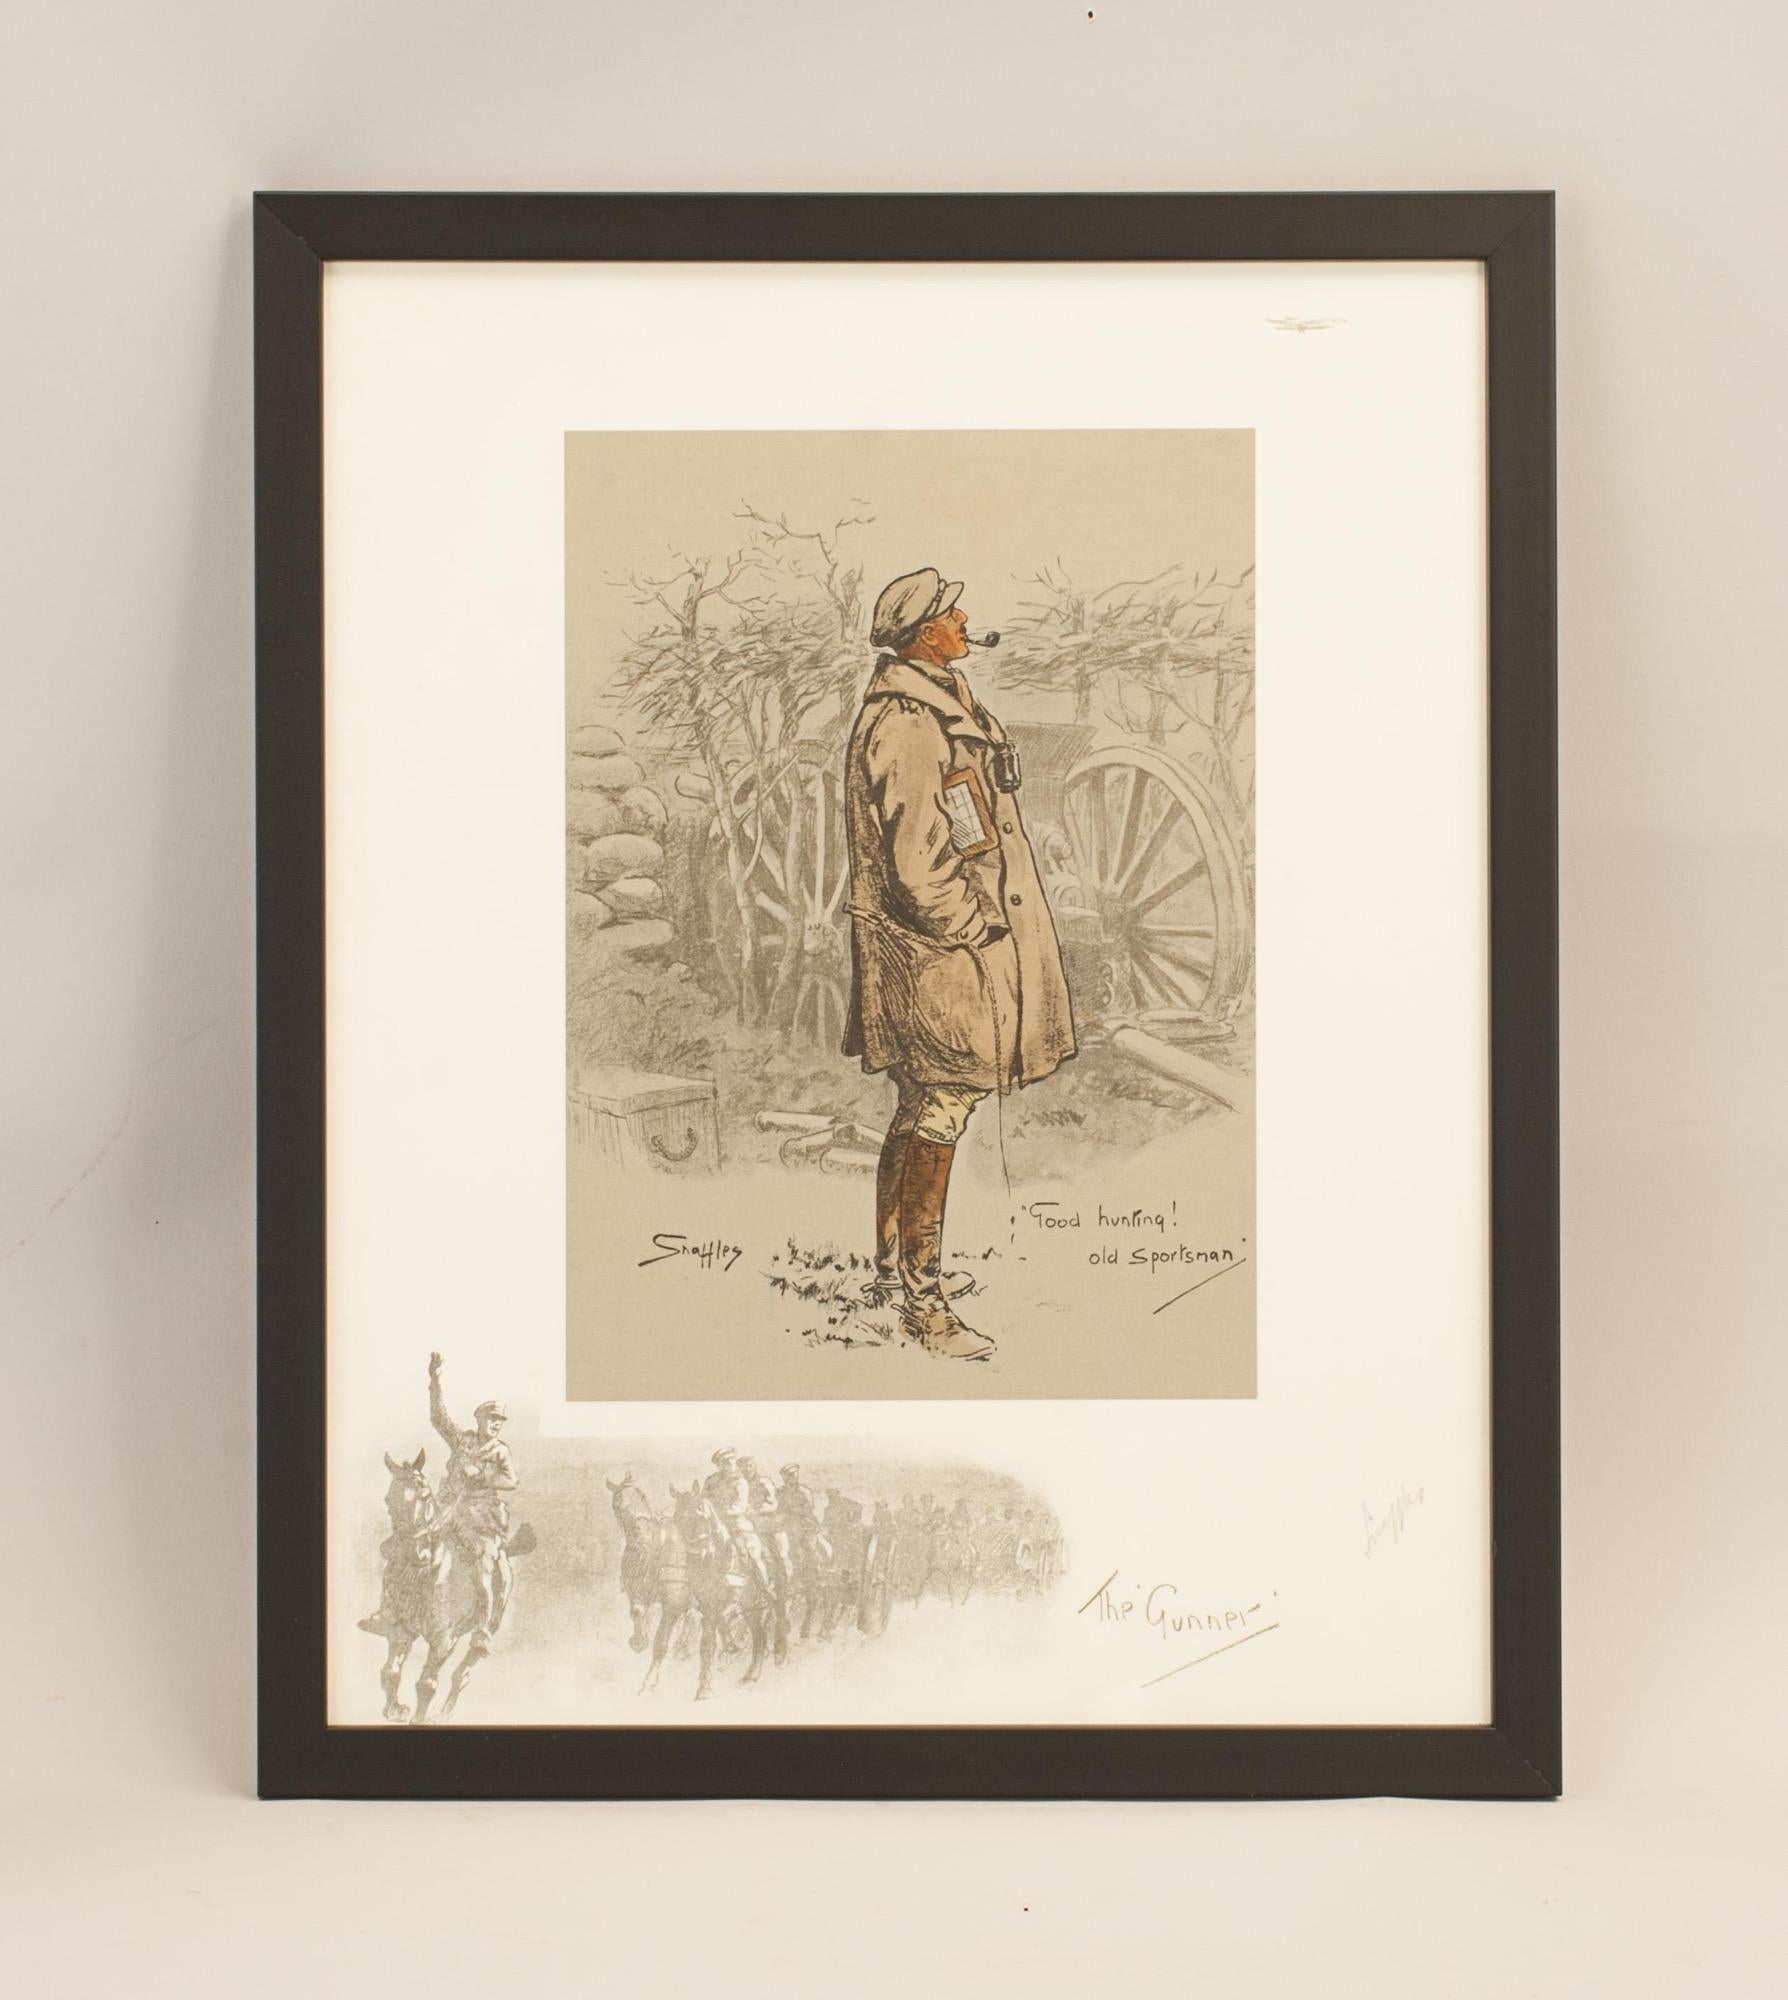 Snaffles WWI Military Print, The Gunner.
A good Snaffles WWI military print entitled 'The 'Gunner' with artist signature in pencil in the bottom right-hand margin. It is a hand coloured lithograph and shows the Gunner looking up at a passing plane